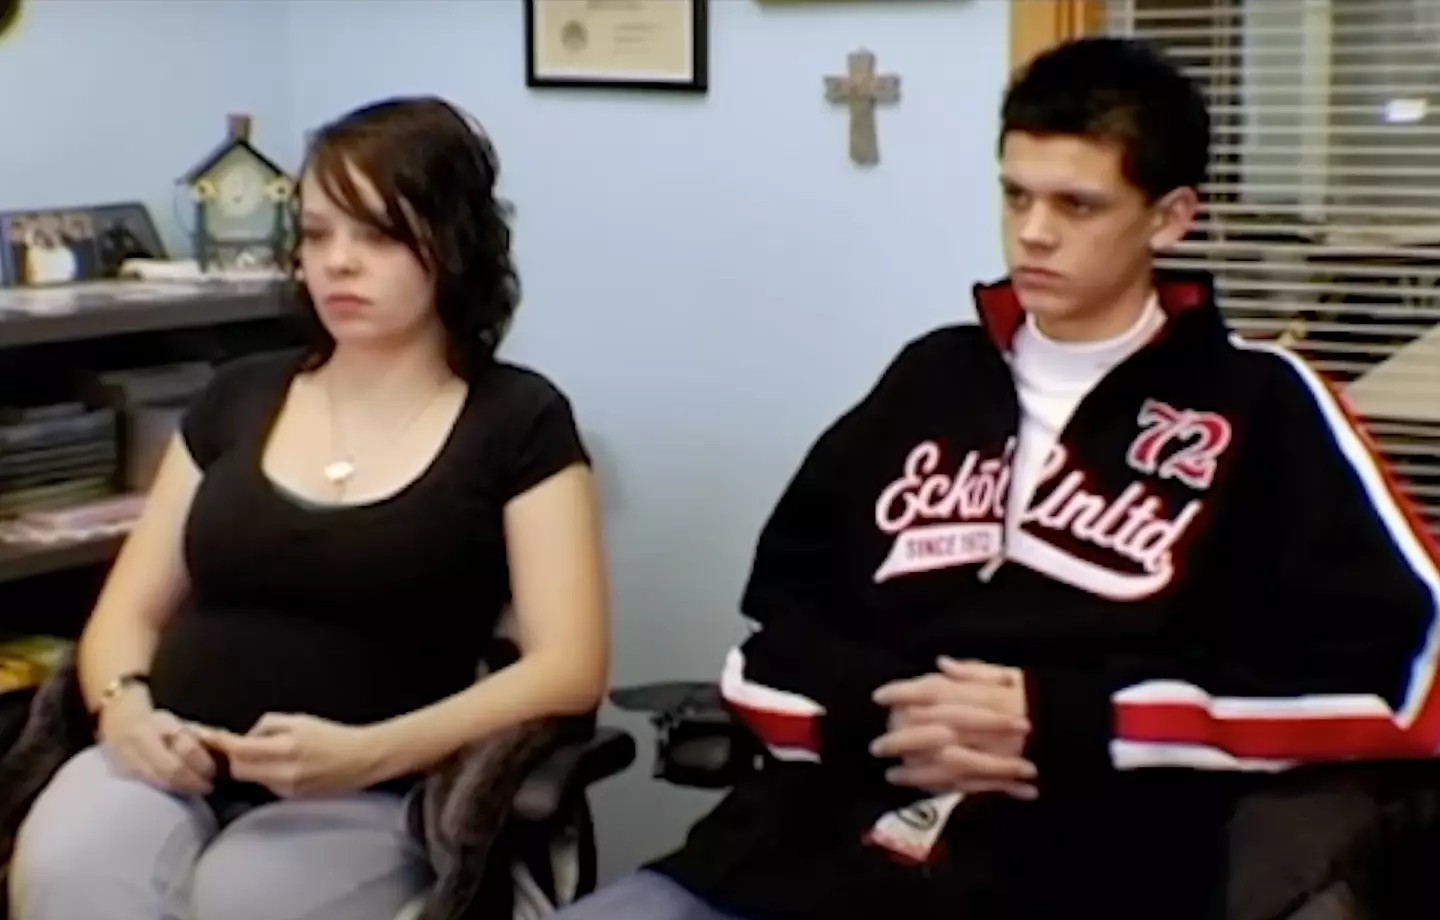 Catelynn and Tyler on 16 & Pregnant in 2009.